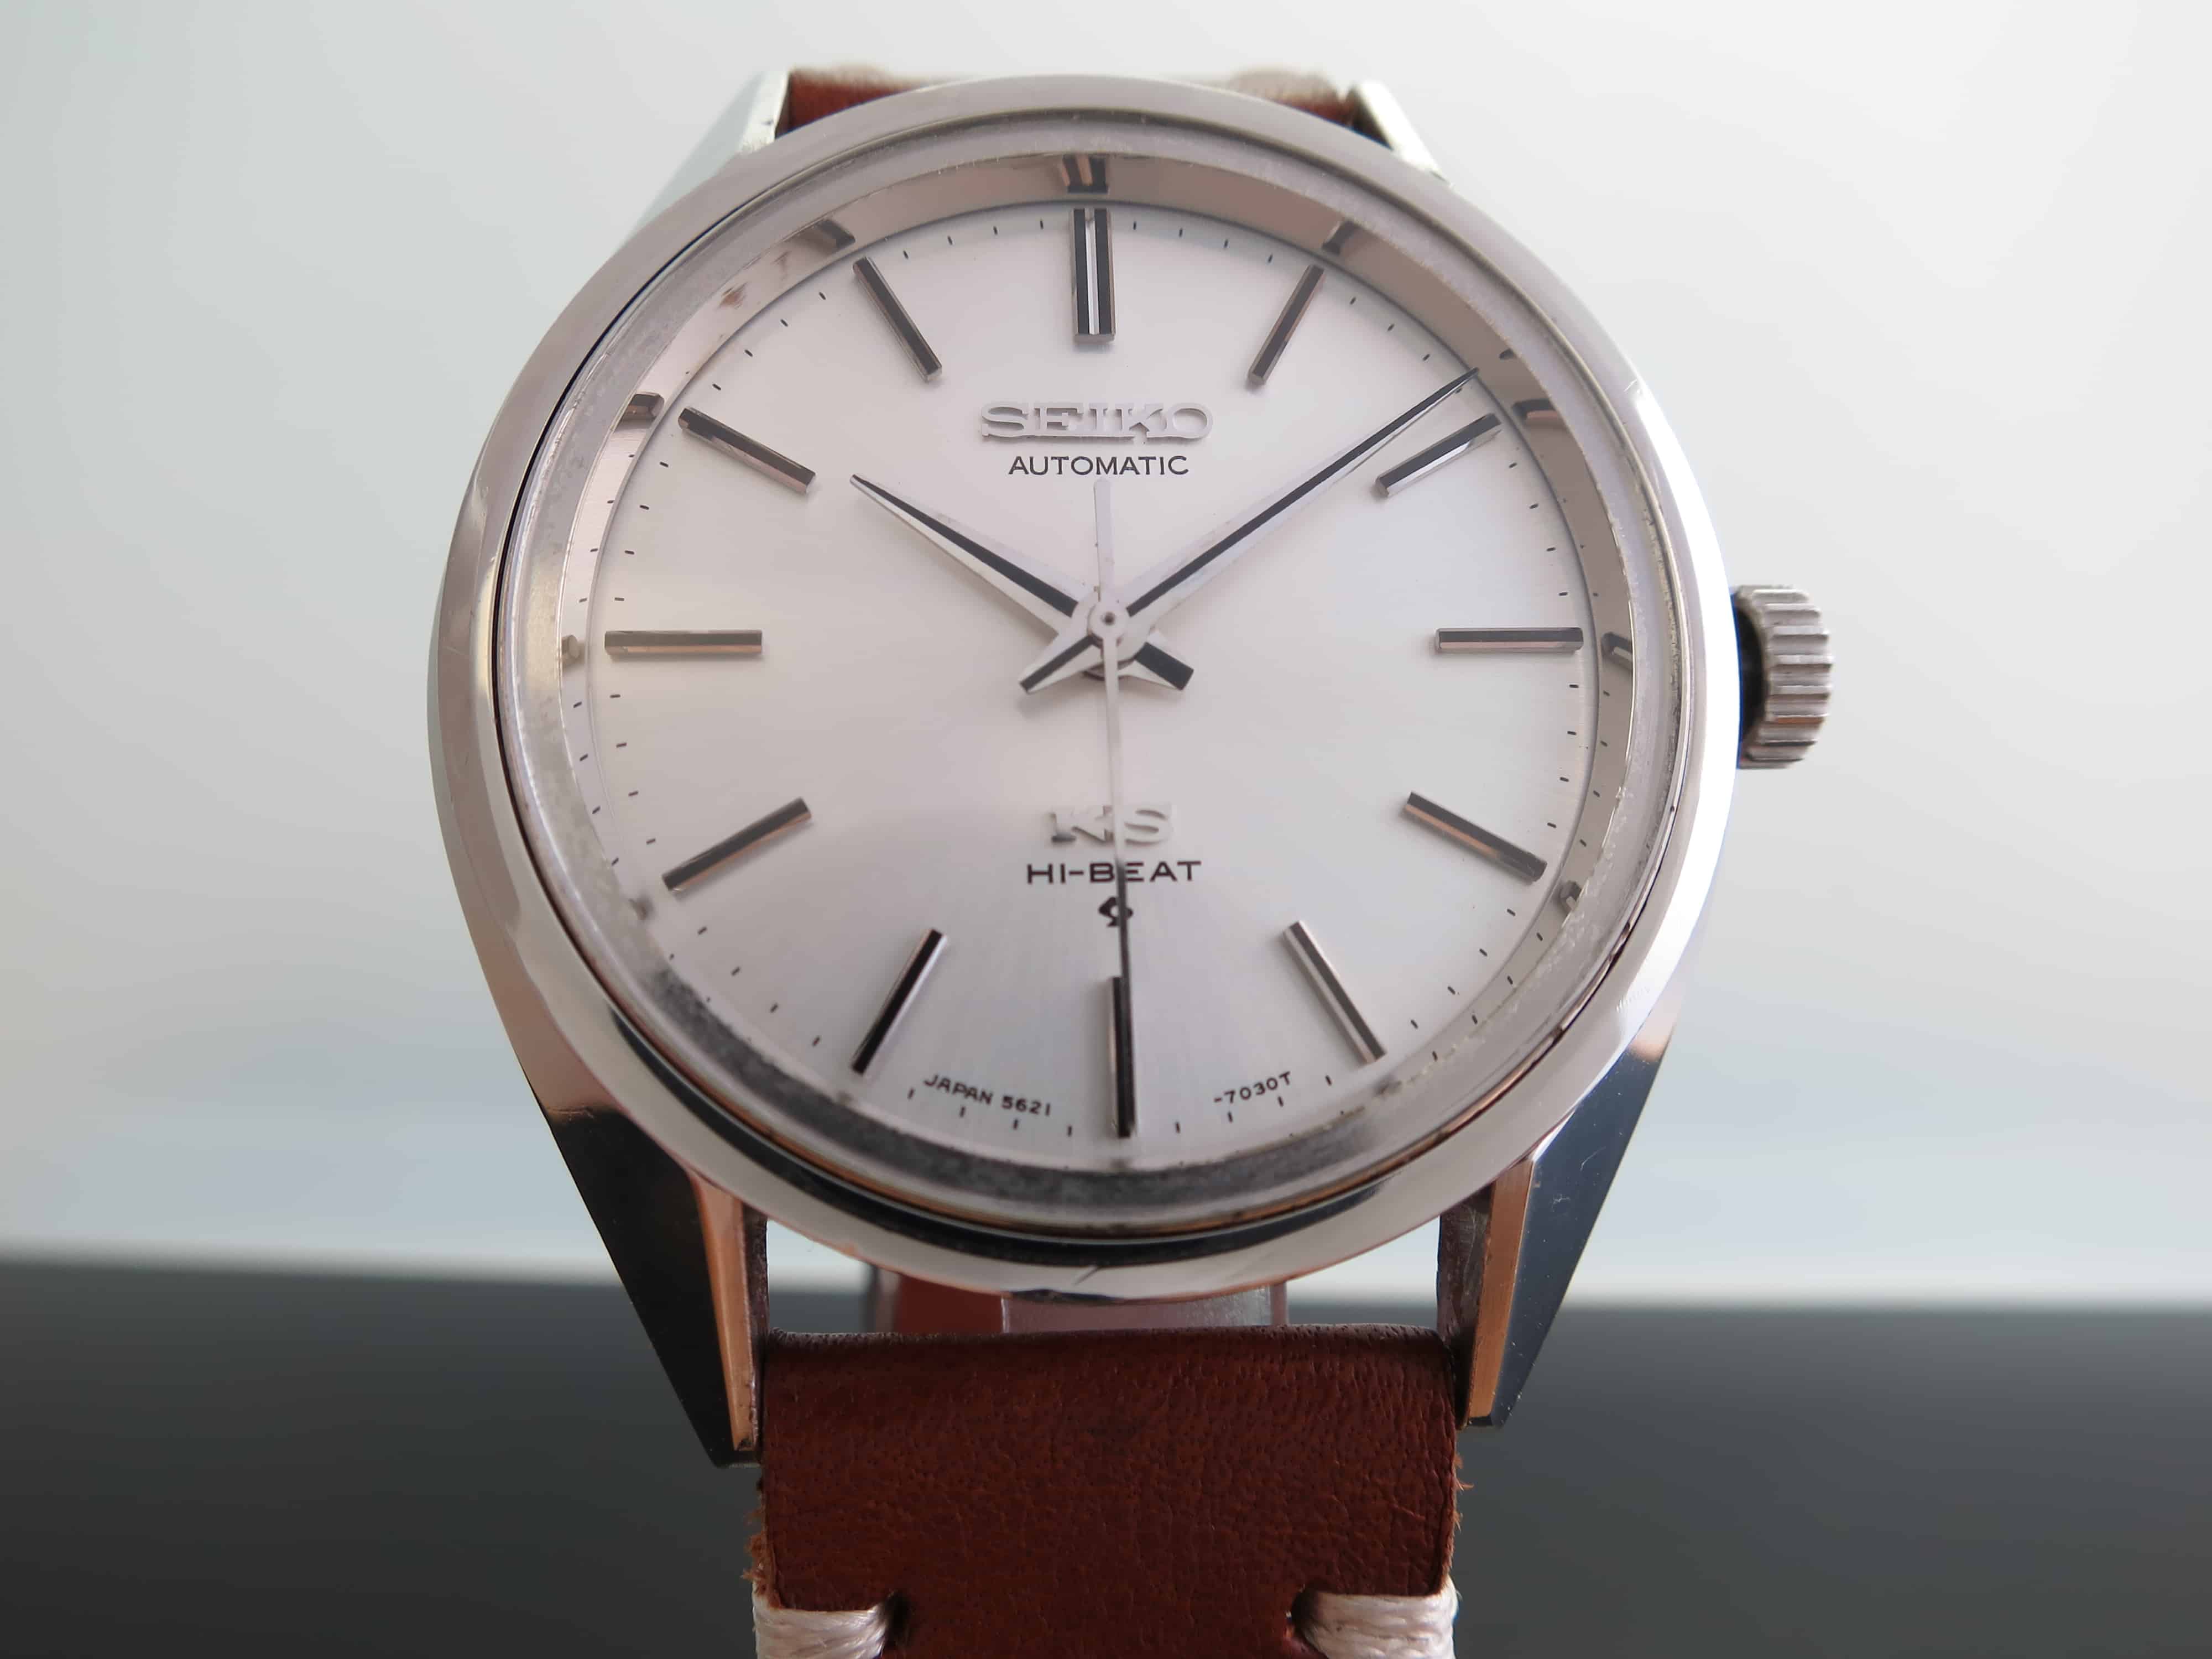 Affordable Vintage: King Seiko ref. 5621-7020, and Some Things to Consider  When Buying King Seiko - Worn & Wound